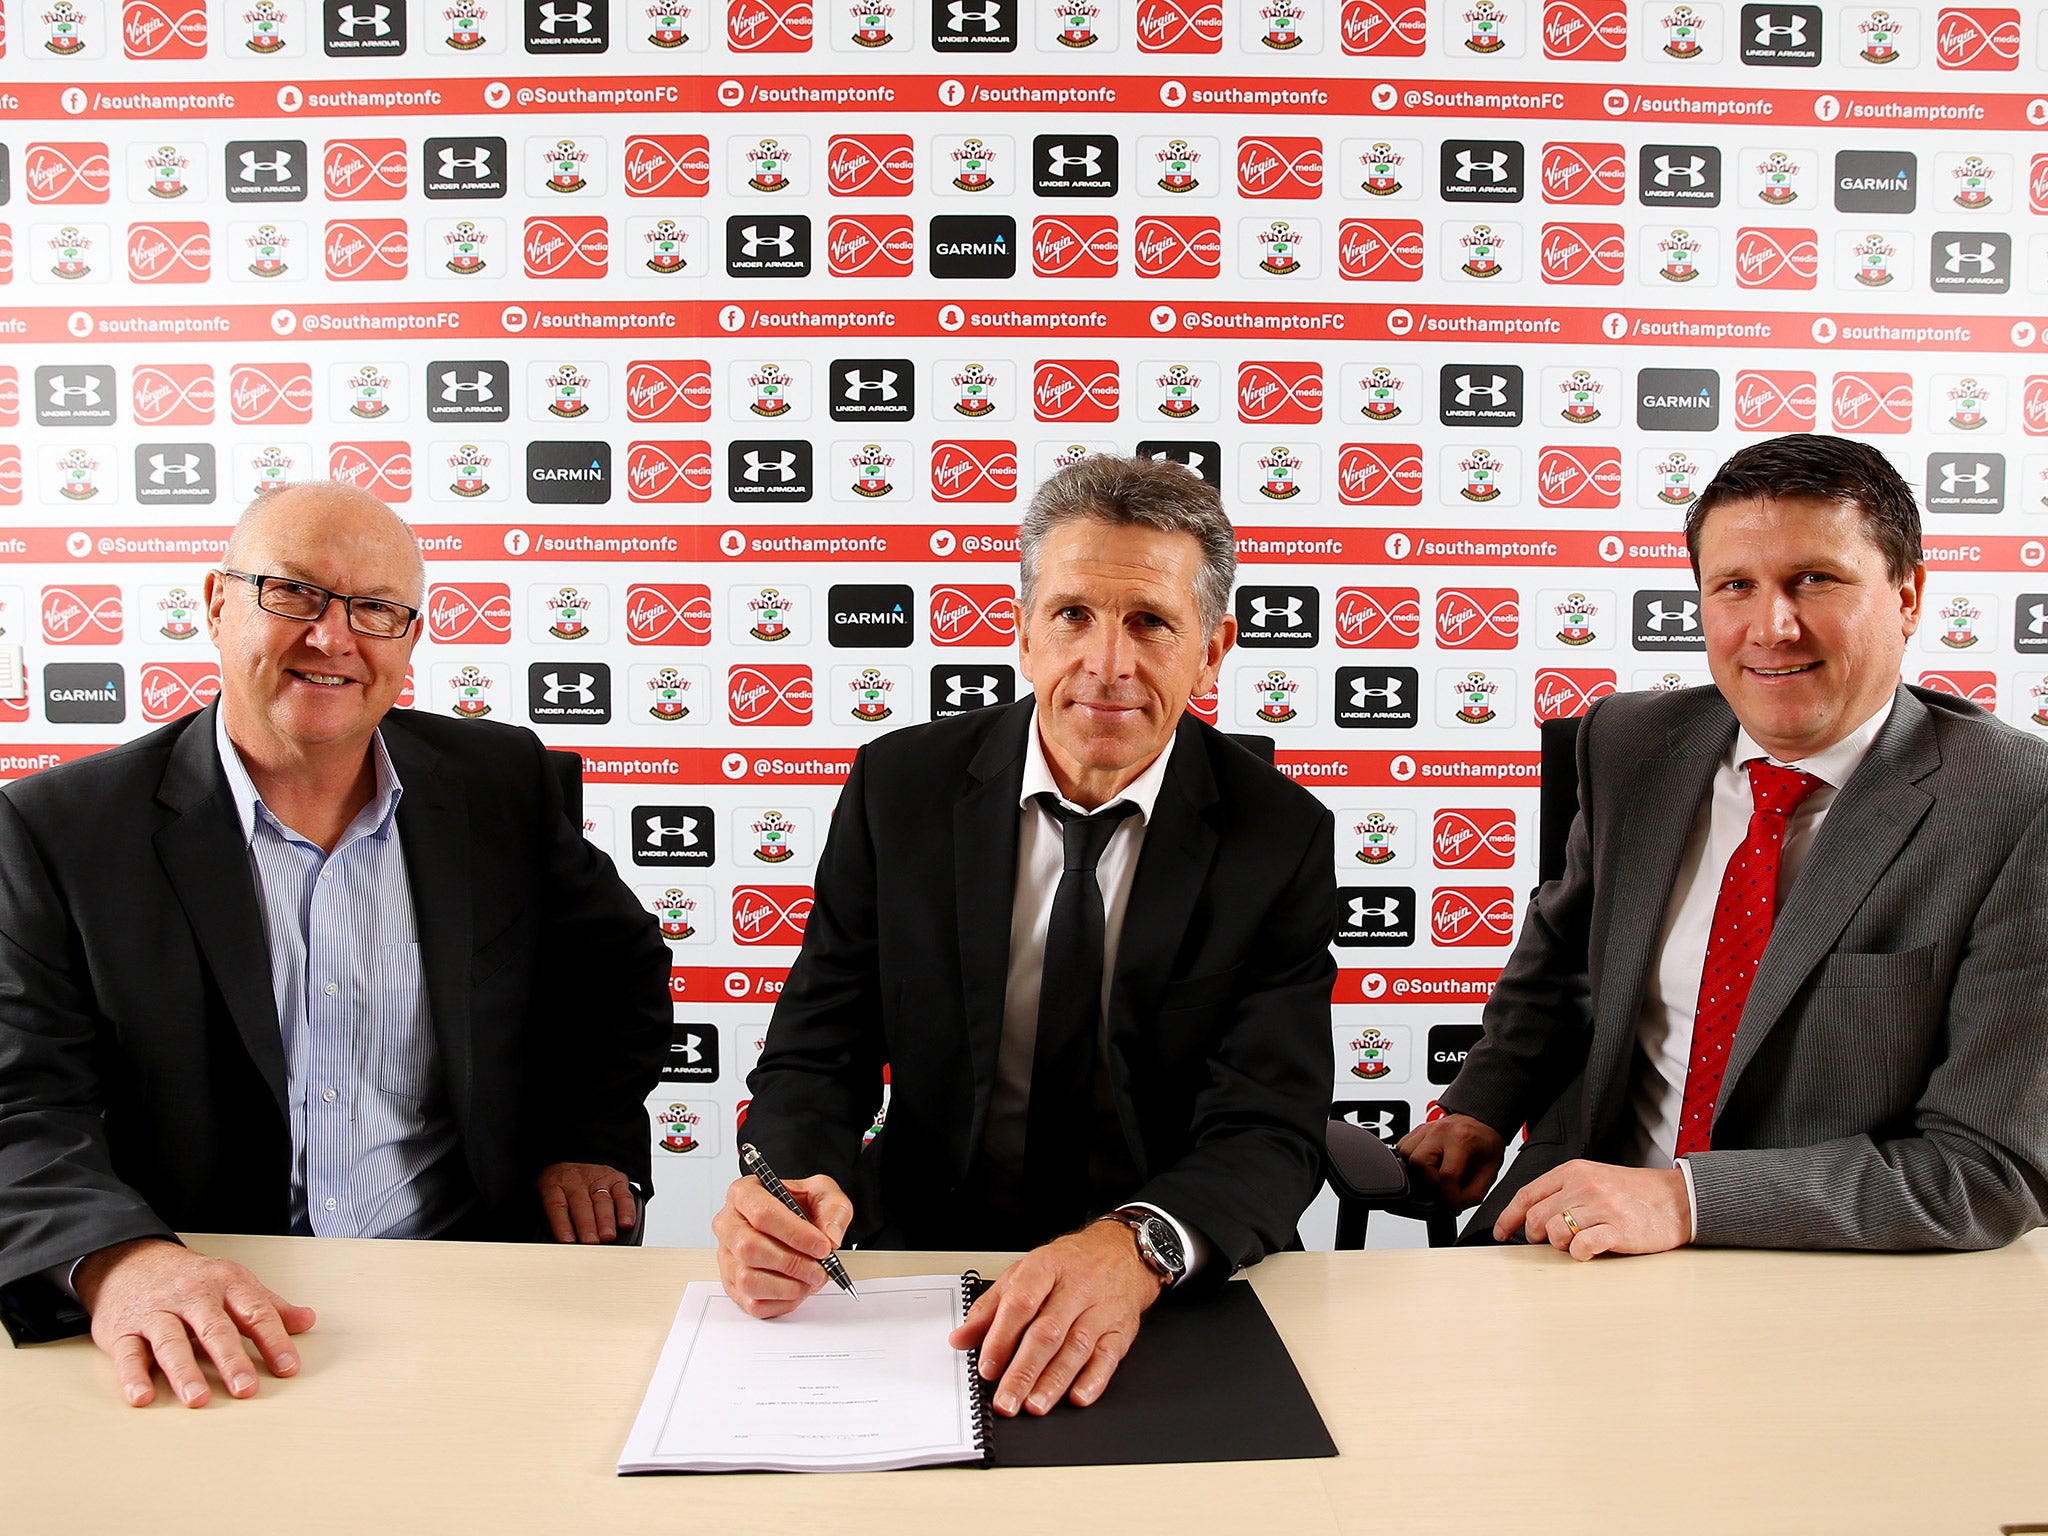 Claude Puel has been named Southampton manager on a three-year deal